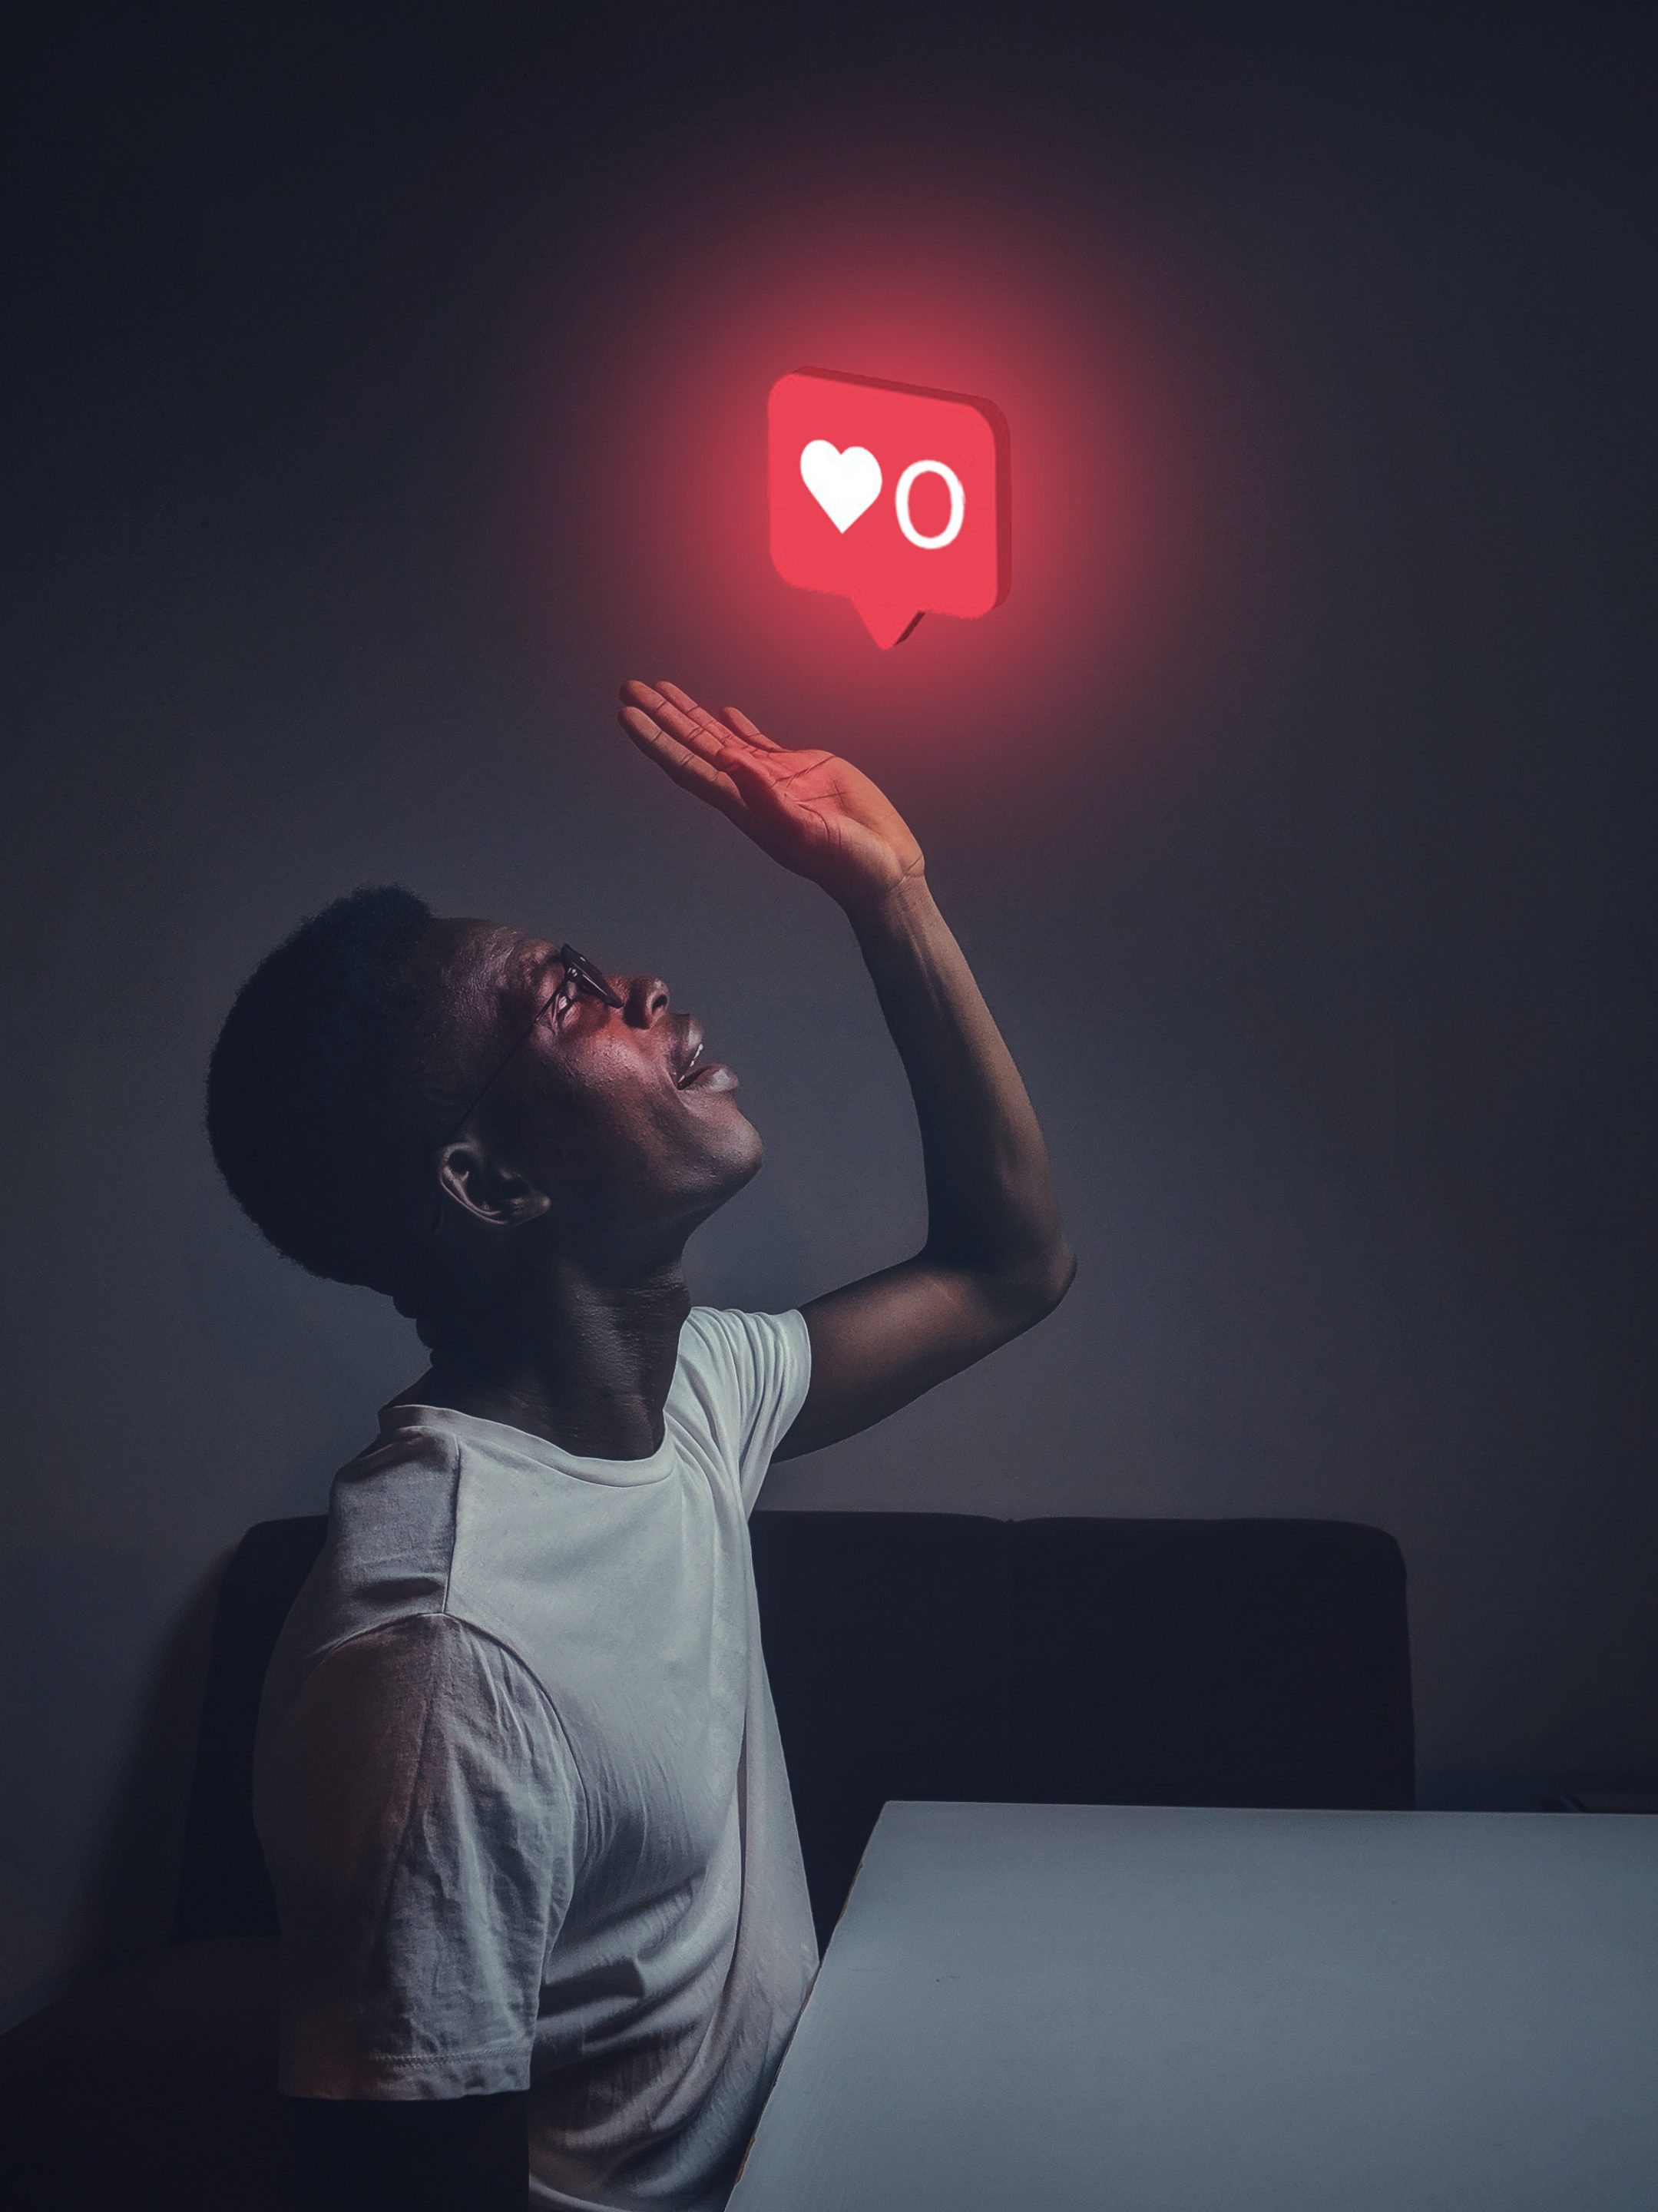 An influencer is holding up a red heart symbol in front of him.